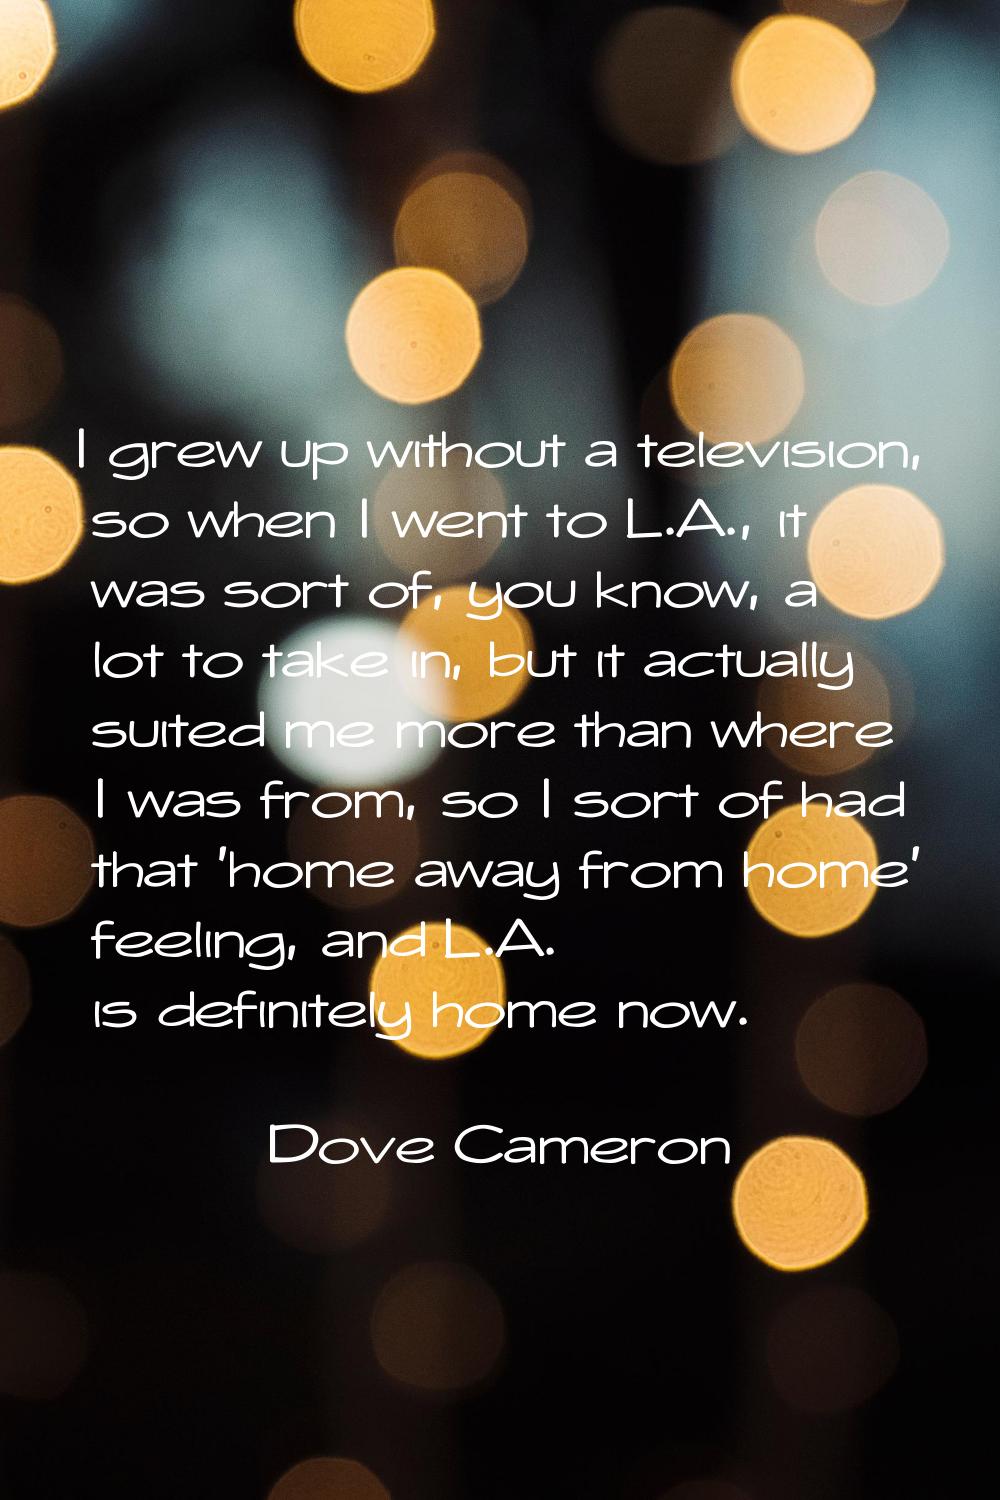 I grew up without a television, so when I went to L.A., it was sort of, you know, a lot to take in,